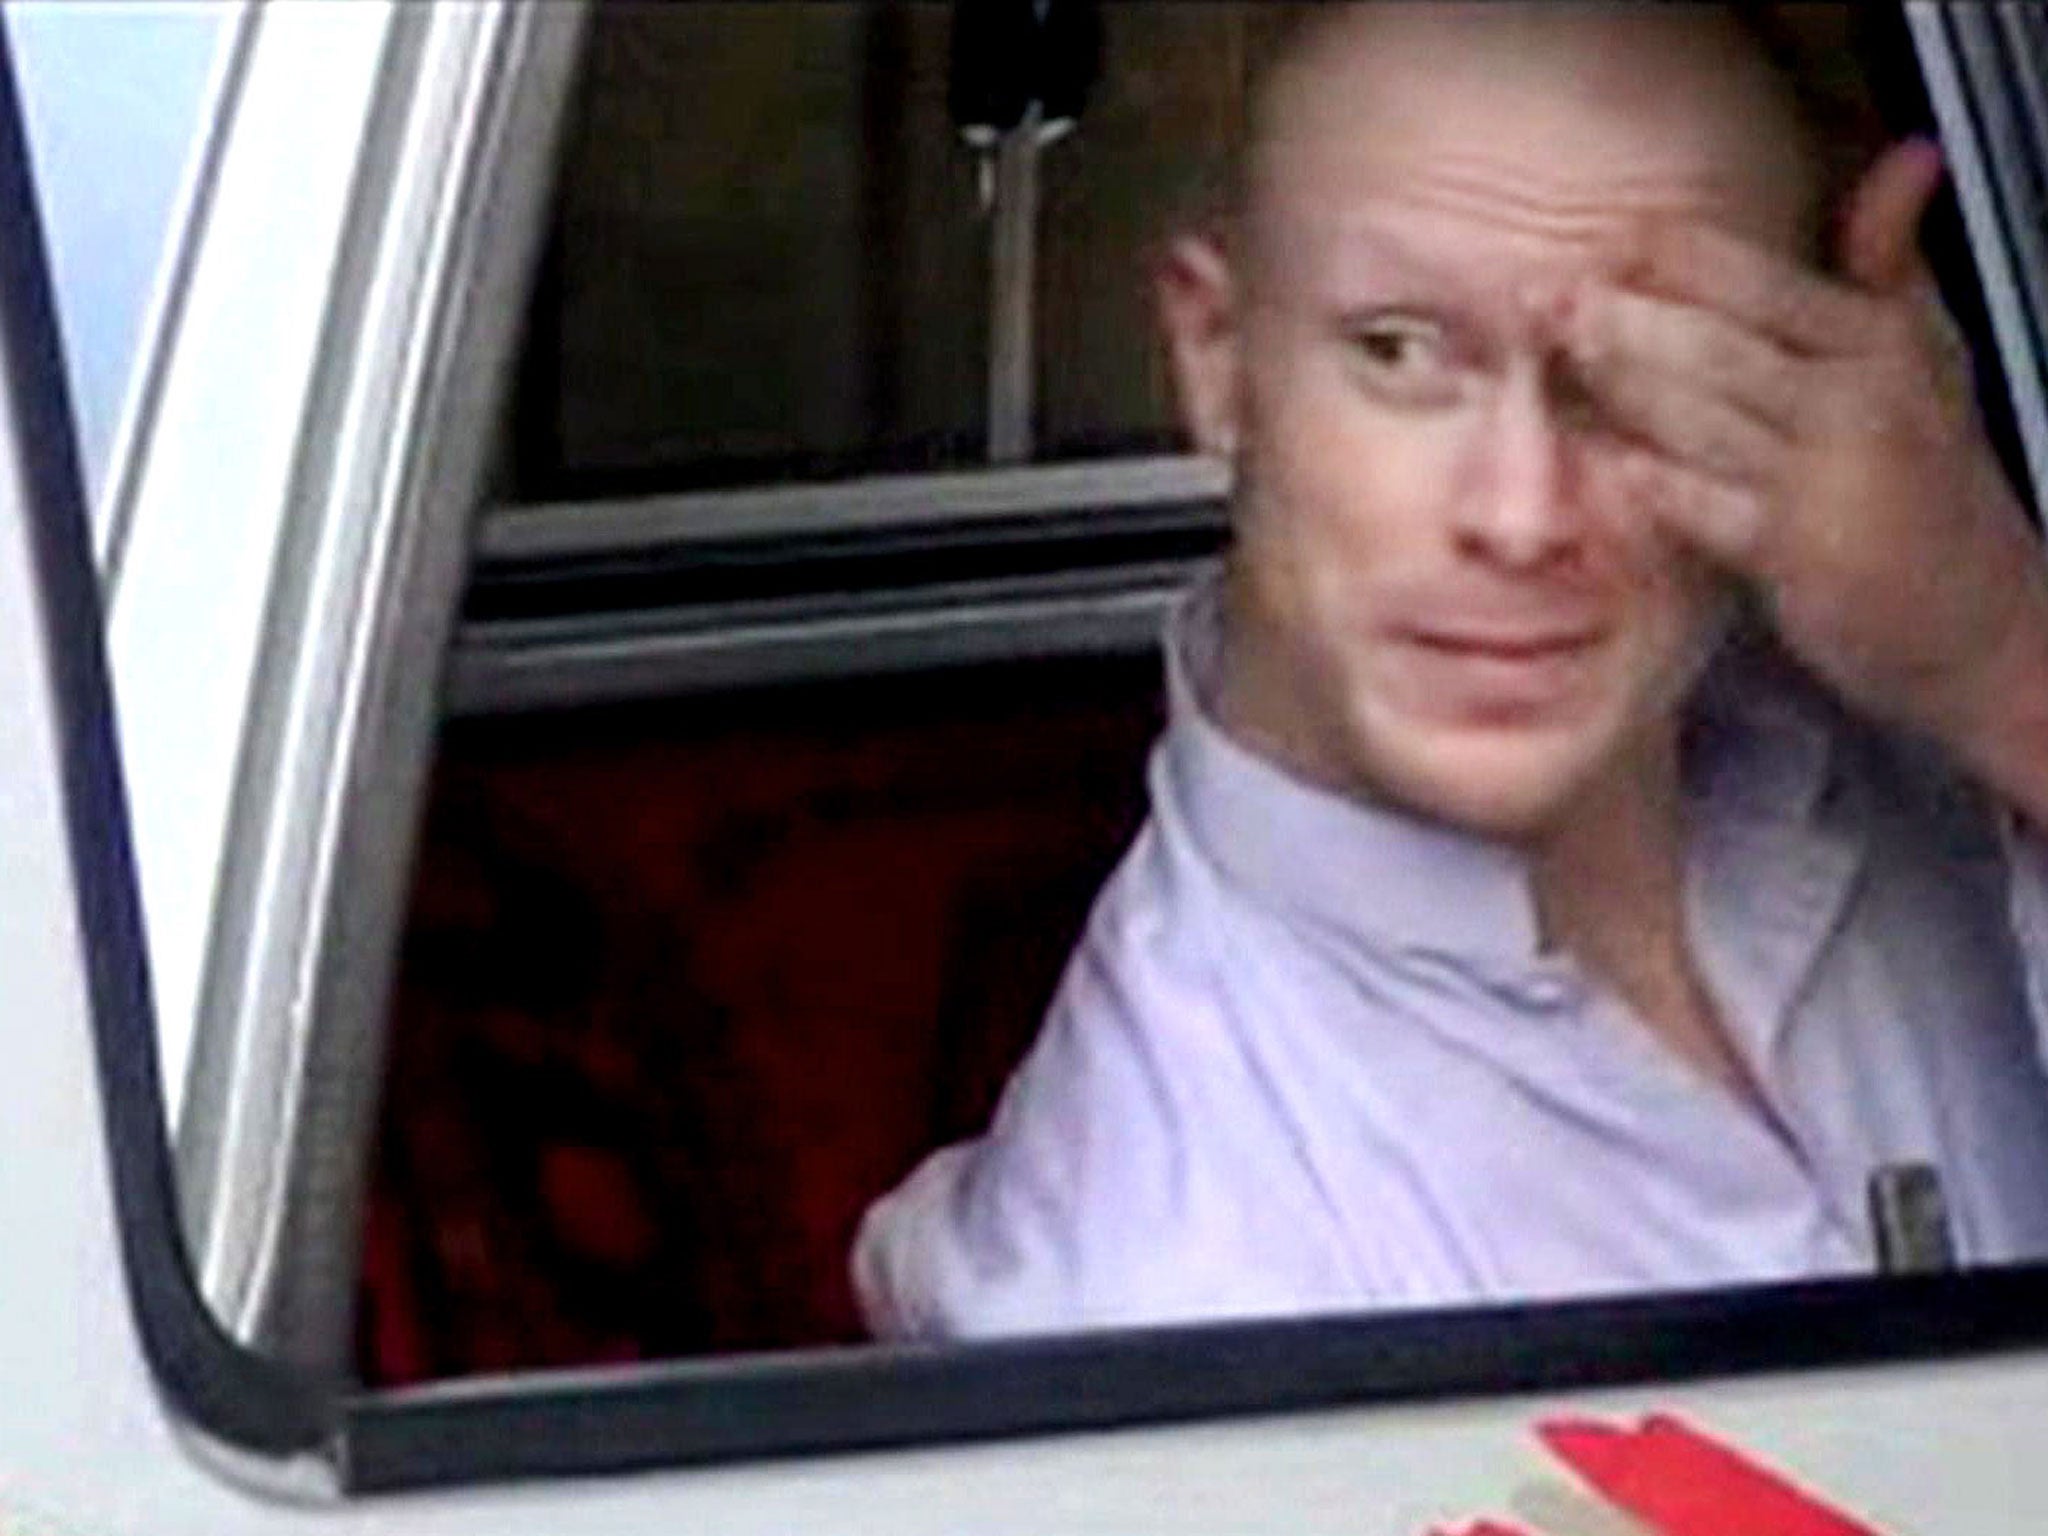 Sgt Bowe Bergdahl, sits in a vehicle guarded by the Taliban in eastern Afghanistan.